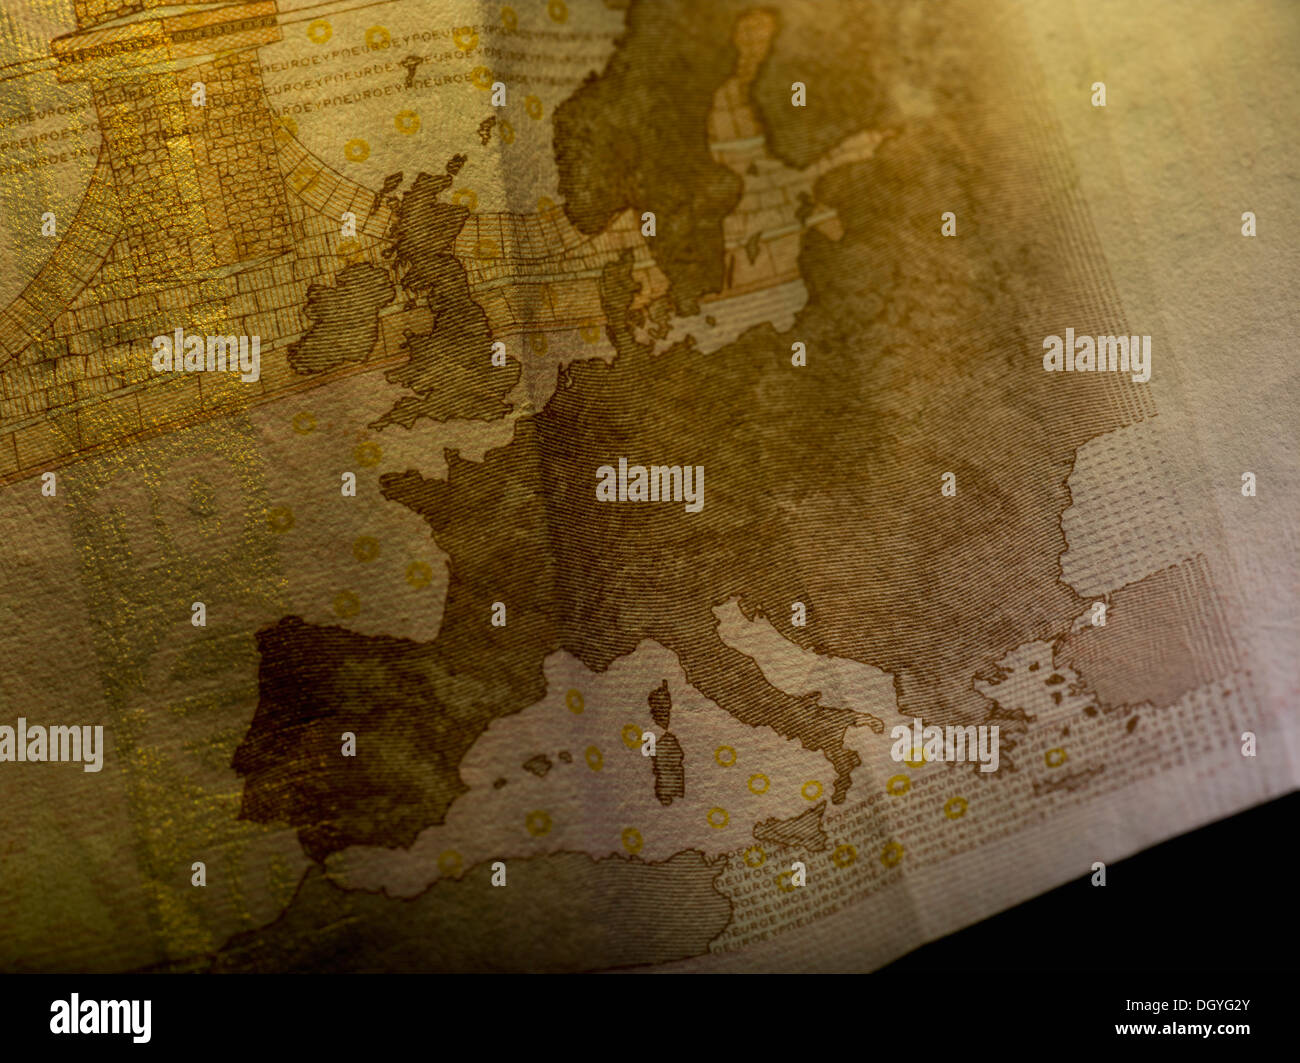 A vintage style map of Europe Stock Photo